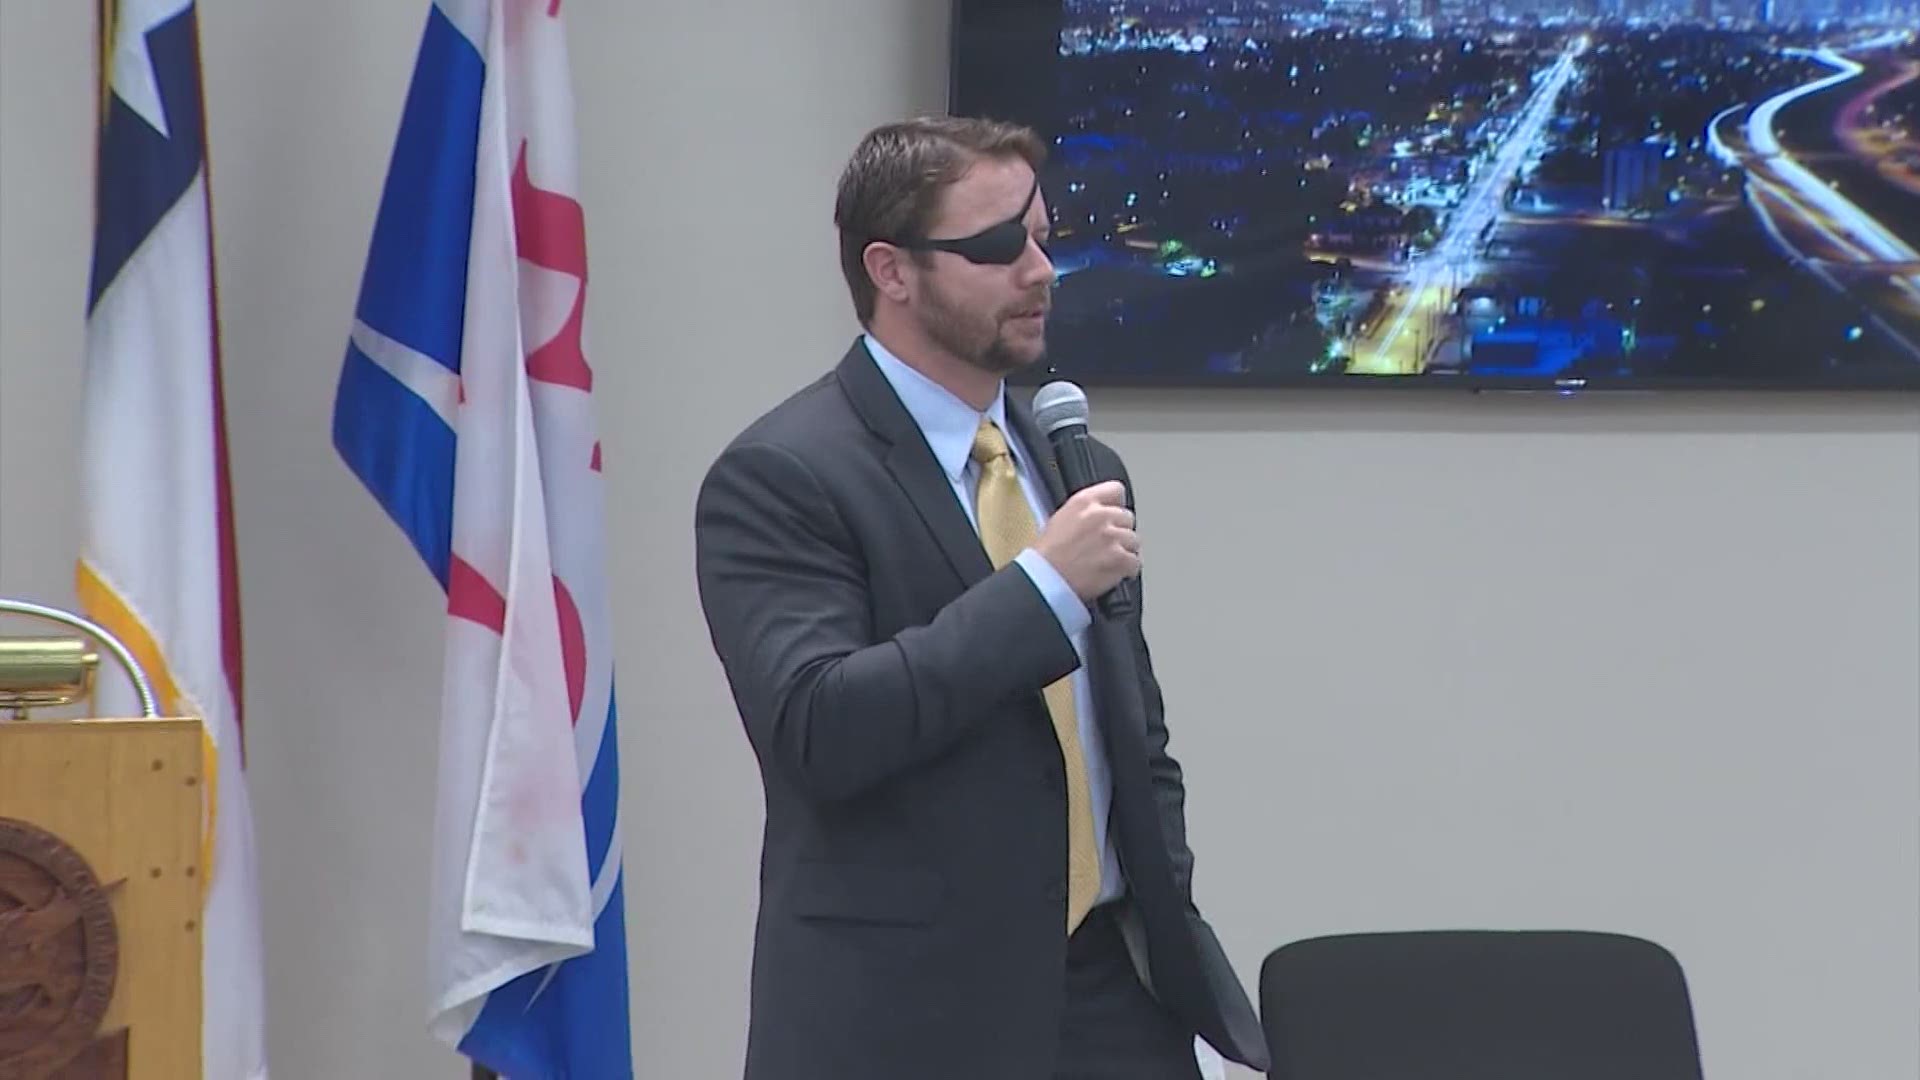 Congressman Dan Crenshaw is recovering after having emergency surgery on his left eye after doctors discovered his retina was detaching.